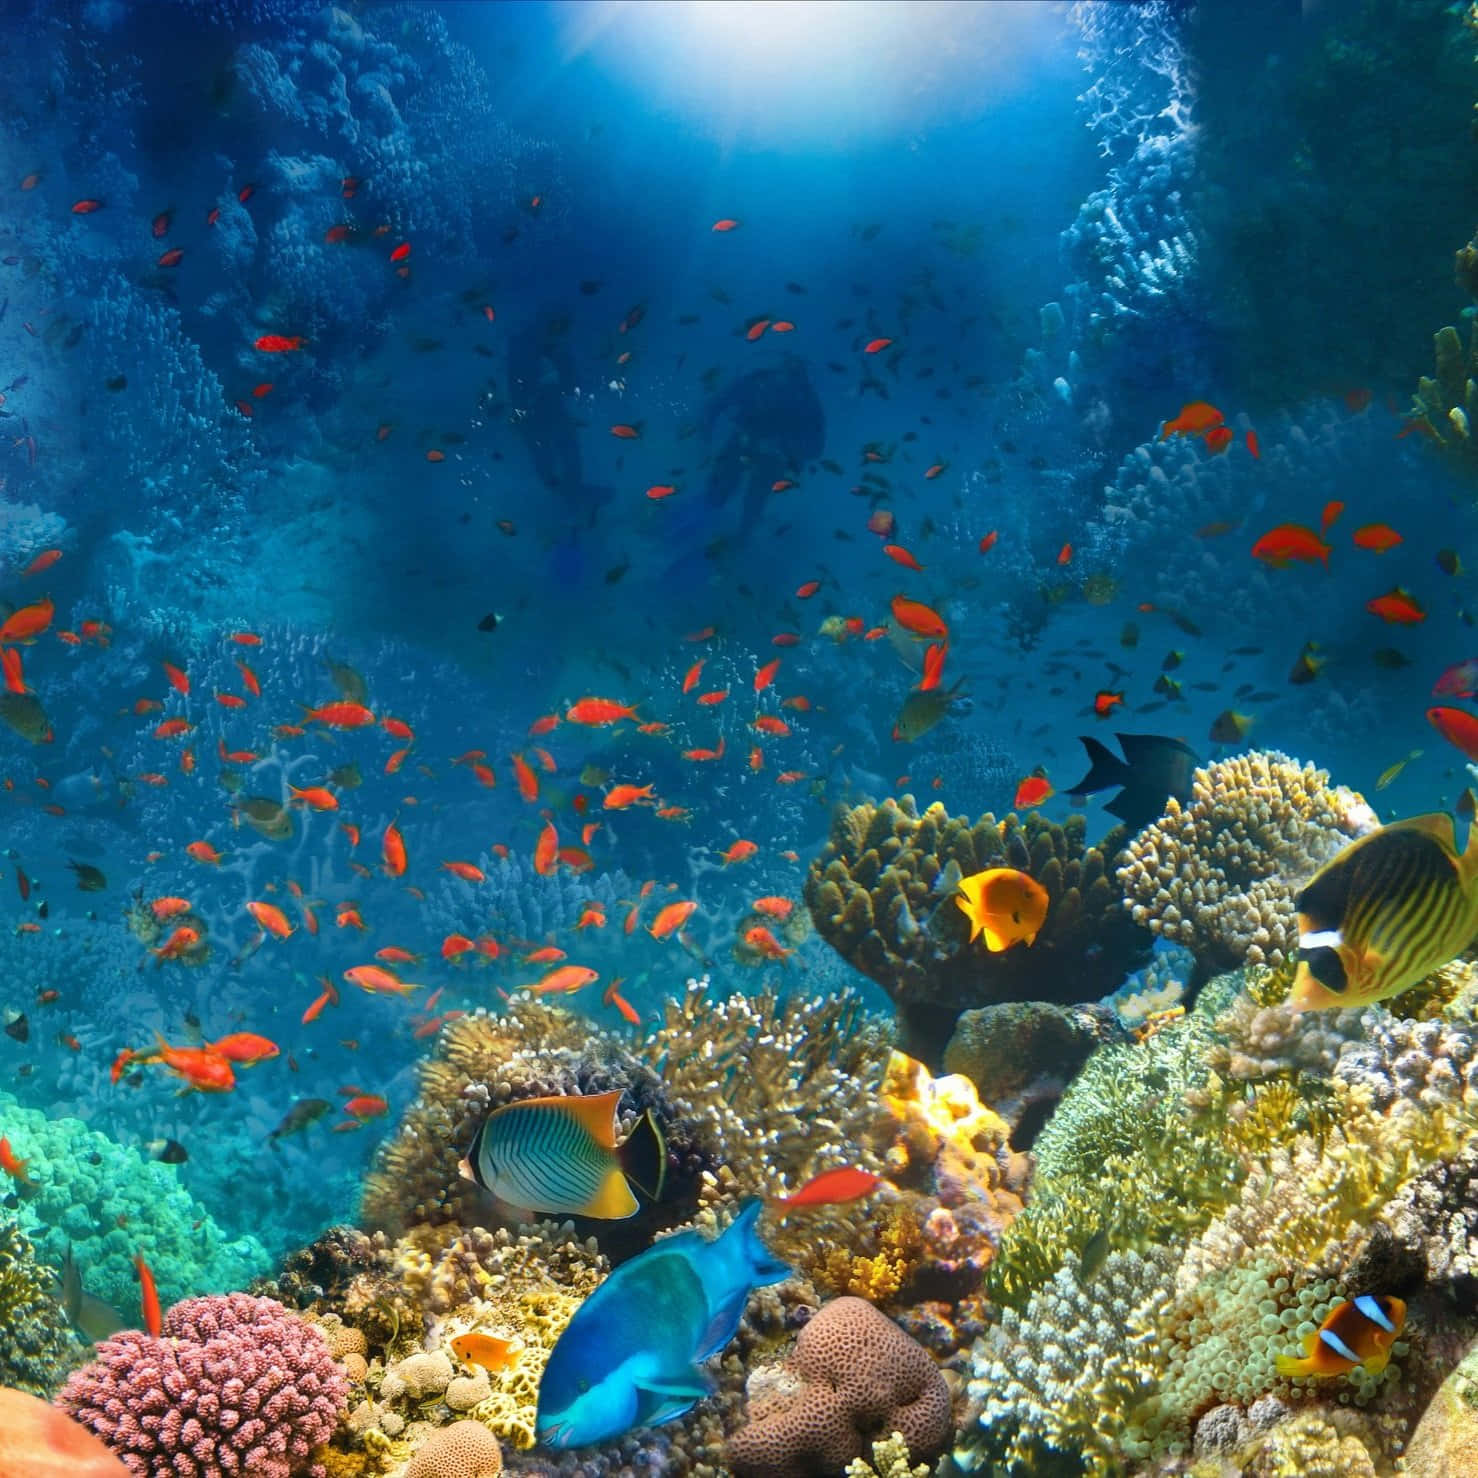 Discover the magically beautiful world of the Underwater Ocean